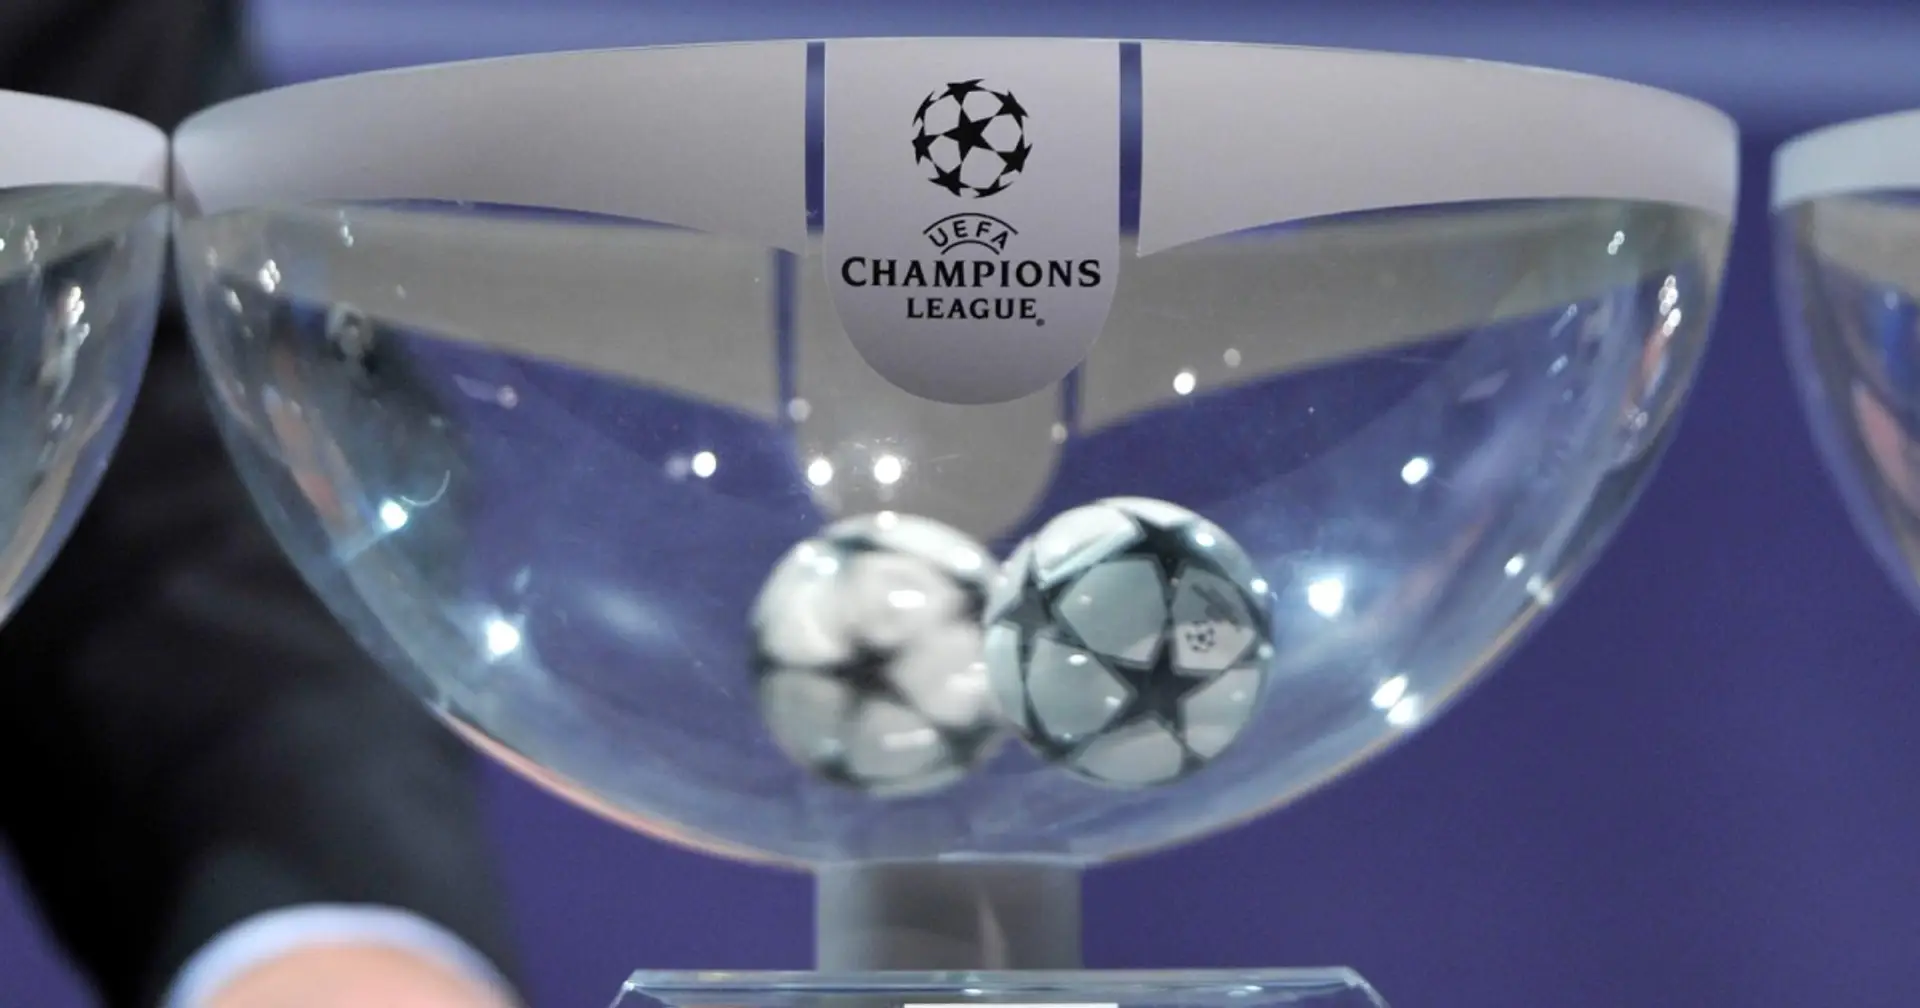 All 32 teams in Champions League 2022-23 known: pots in full, Chelsea's potential opponents revealed